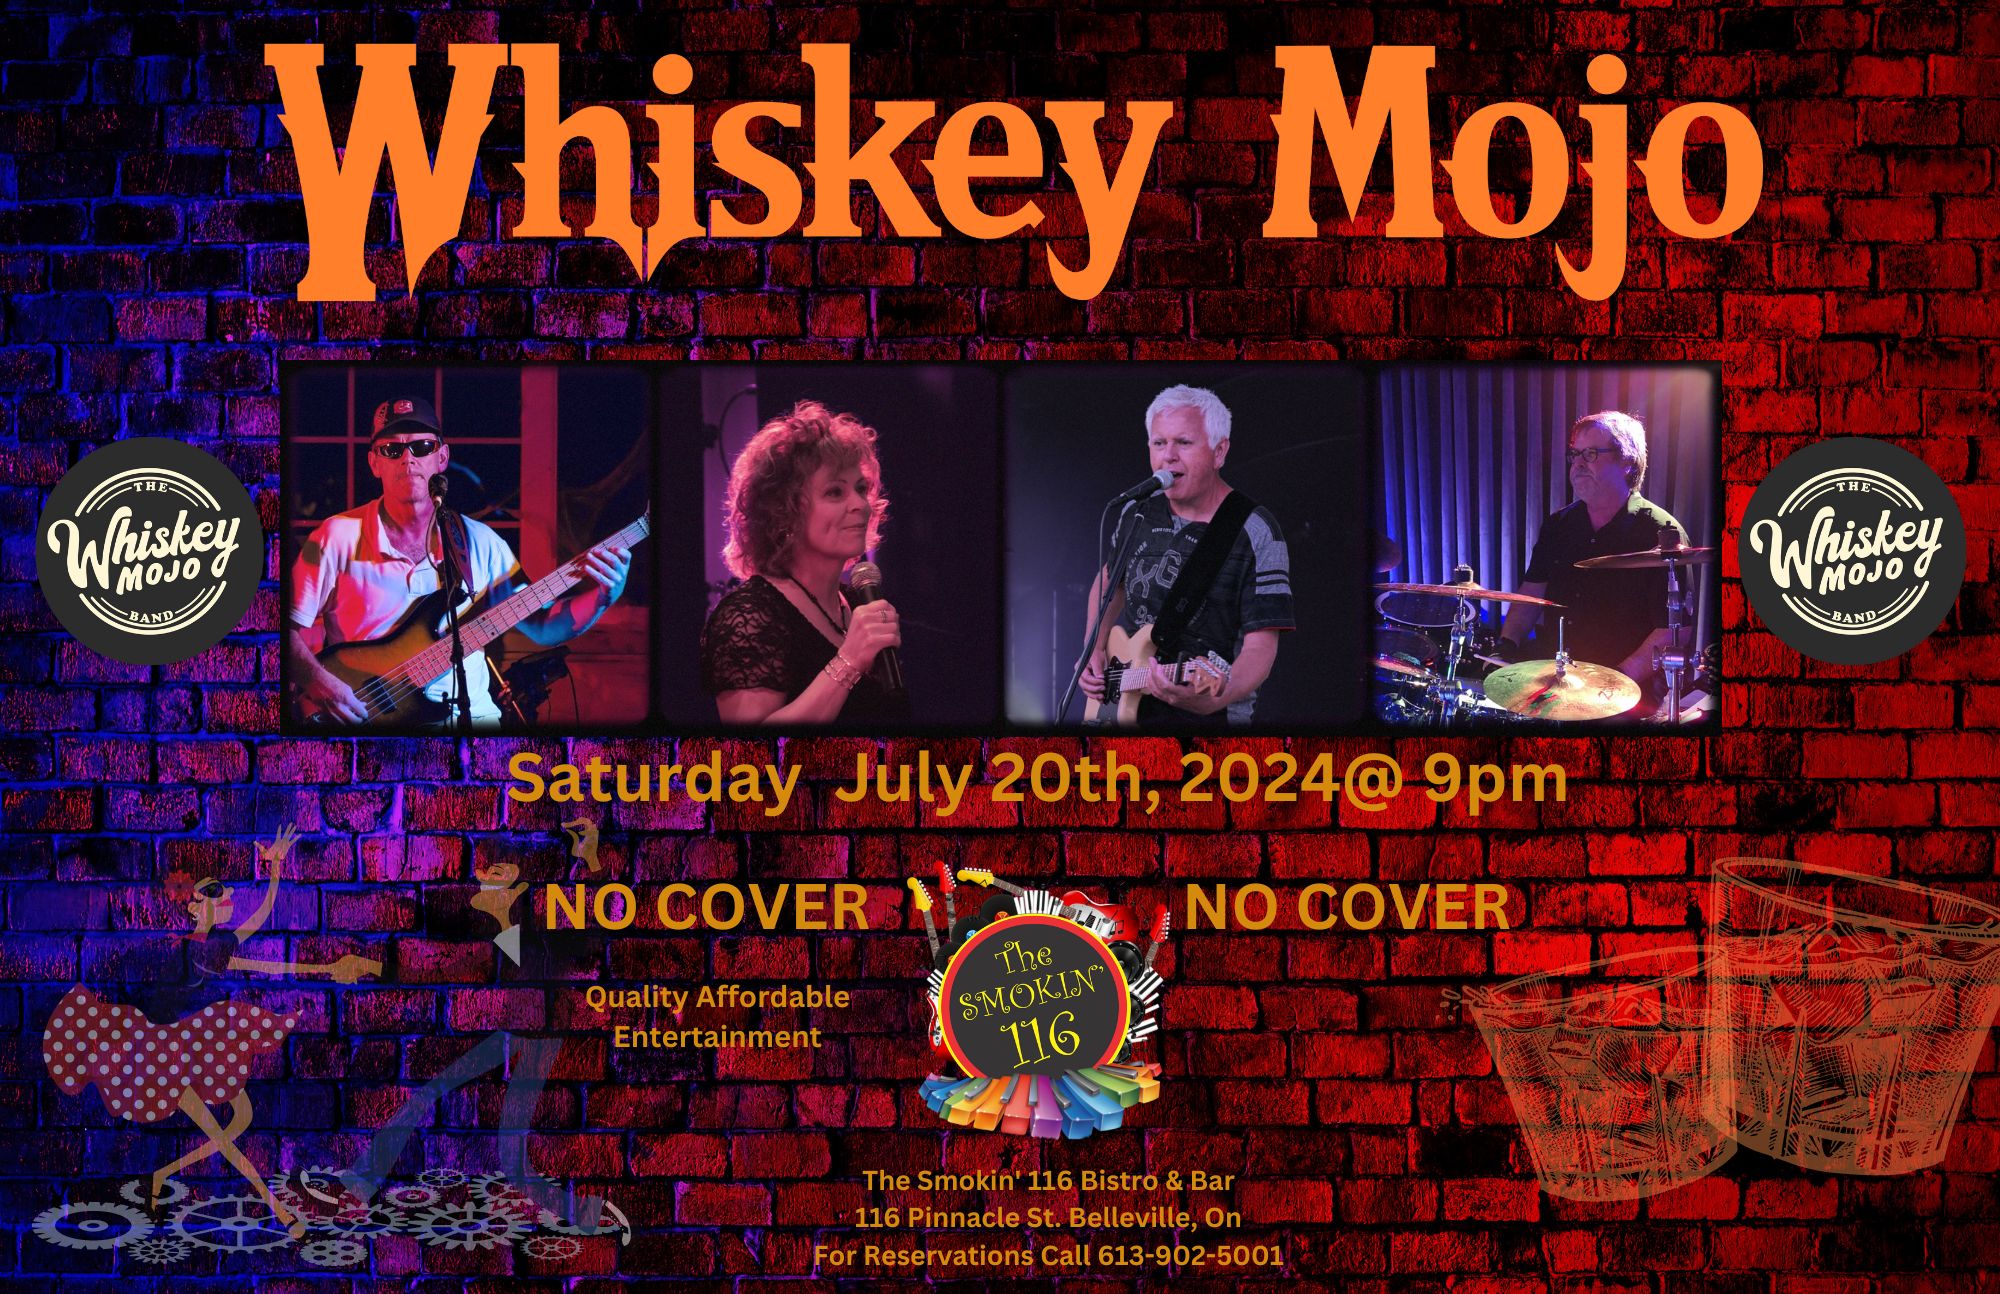 Poster titled "Whiskey Mojo" with photo of the band.